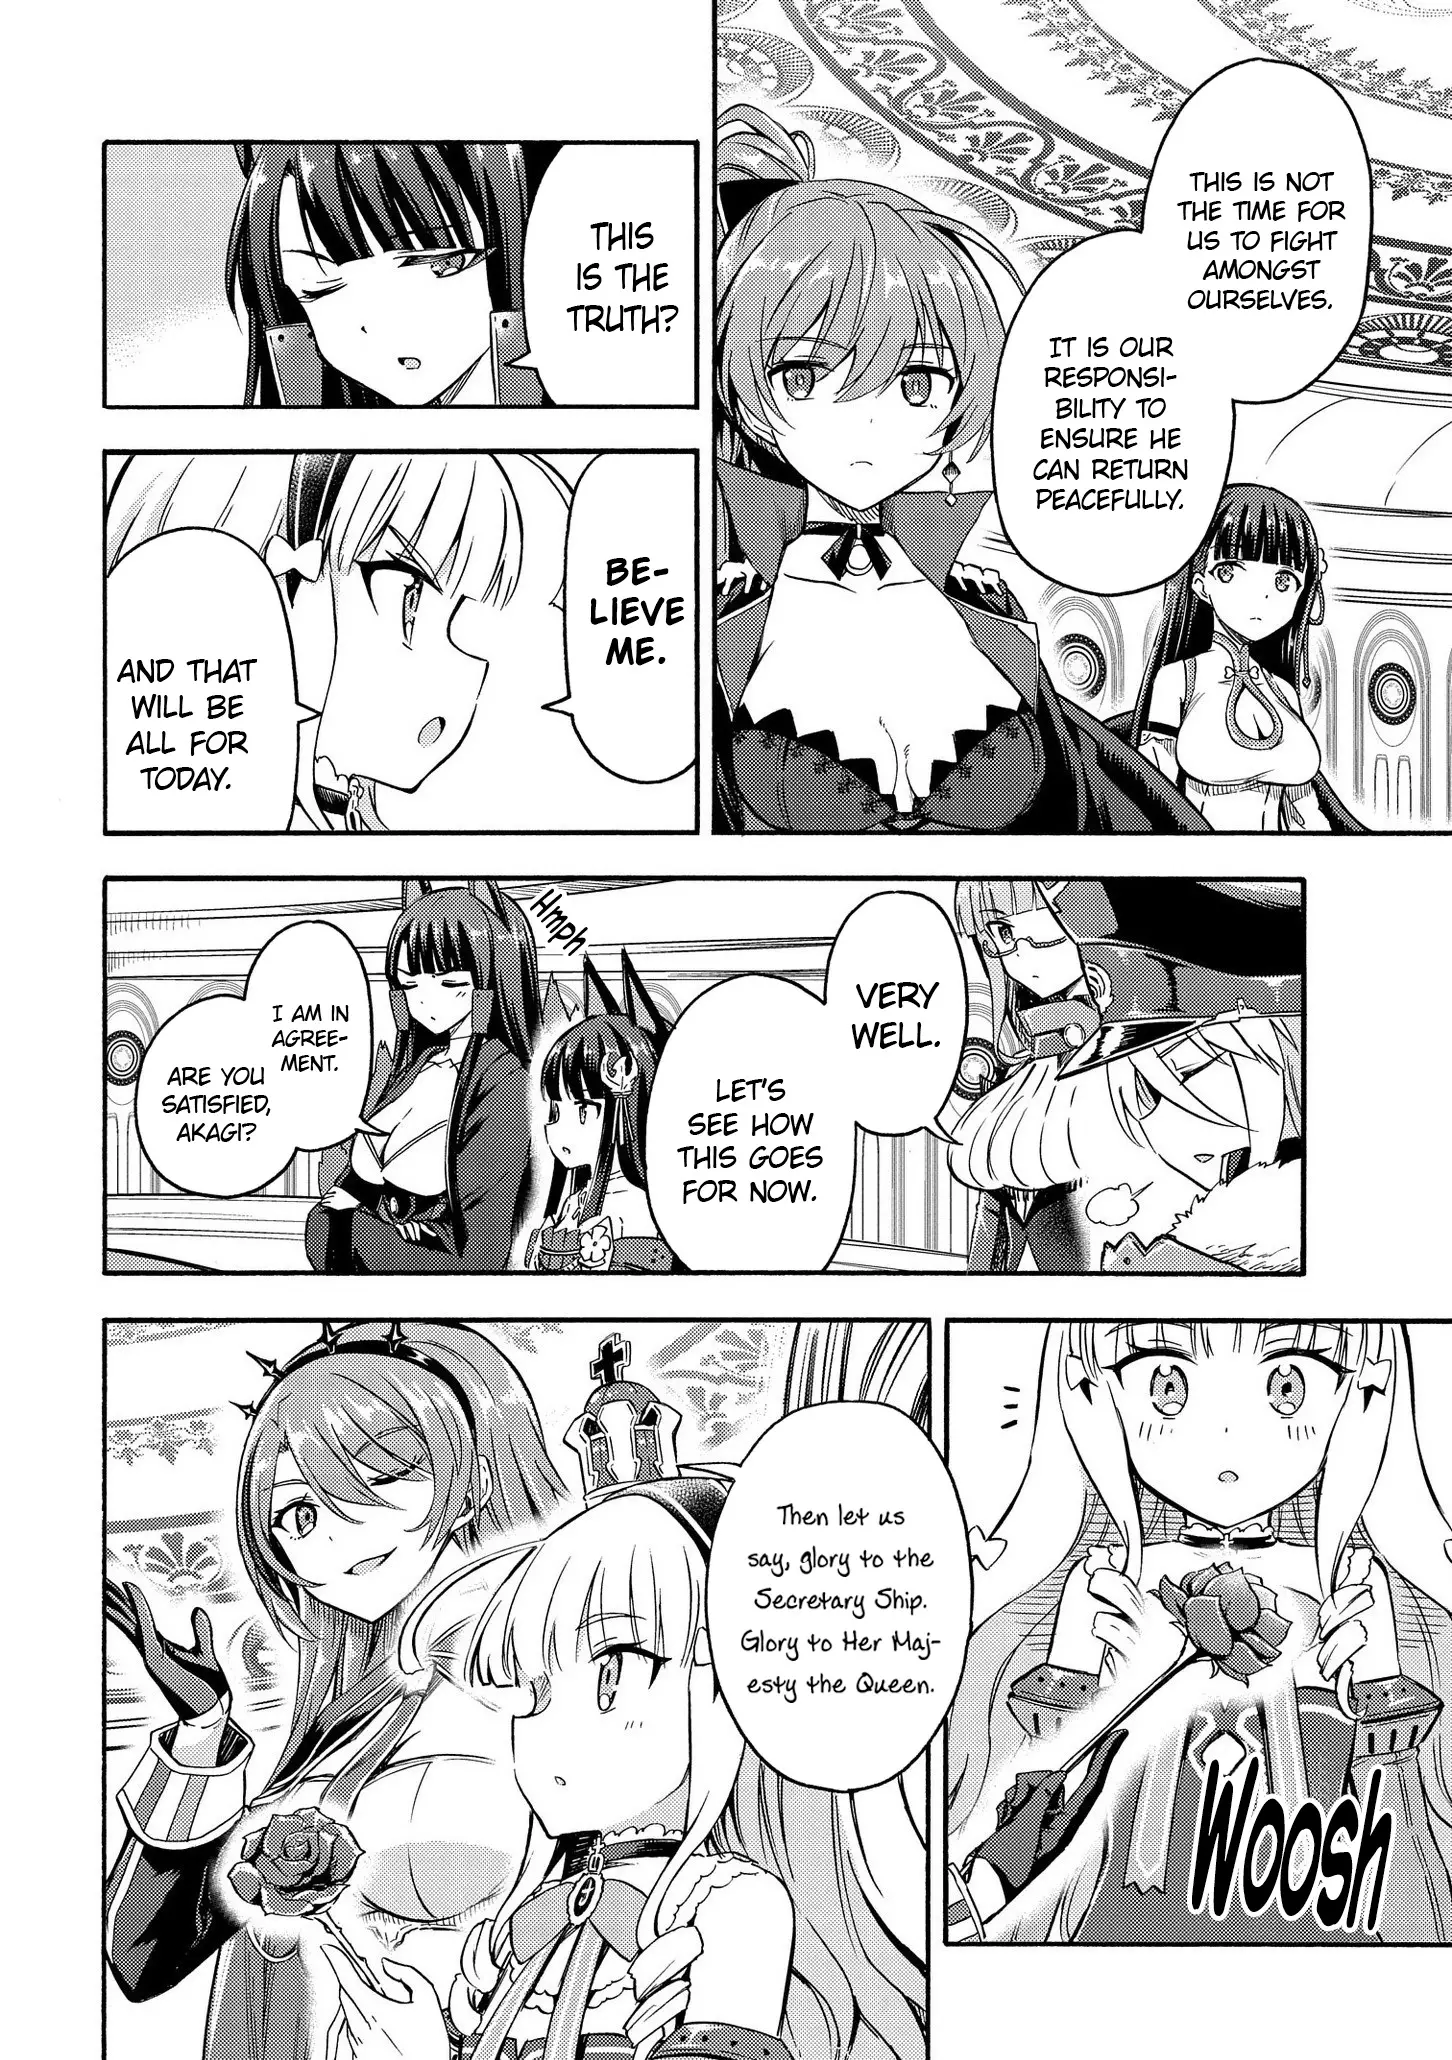 Azur Lane: Queen's Orders - 80 page 2-28c799f6